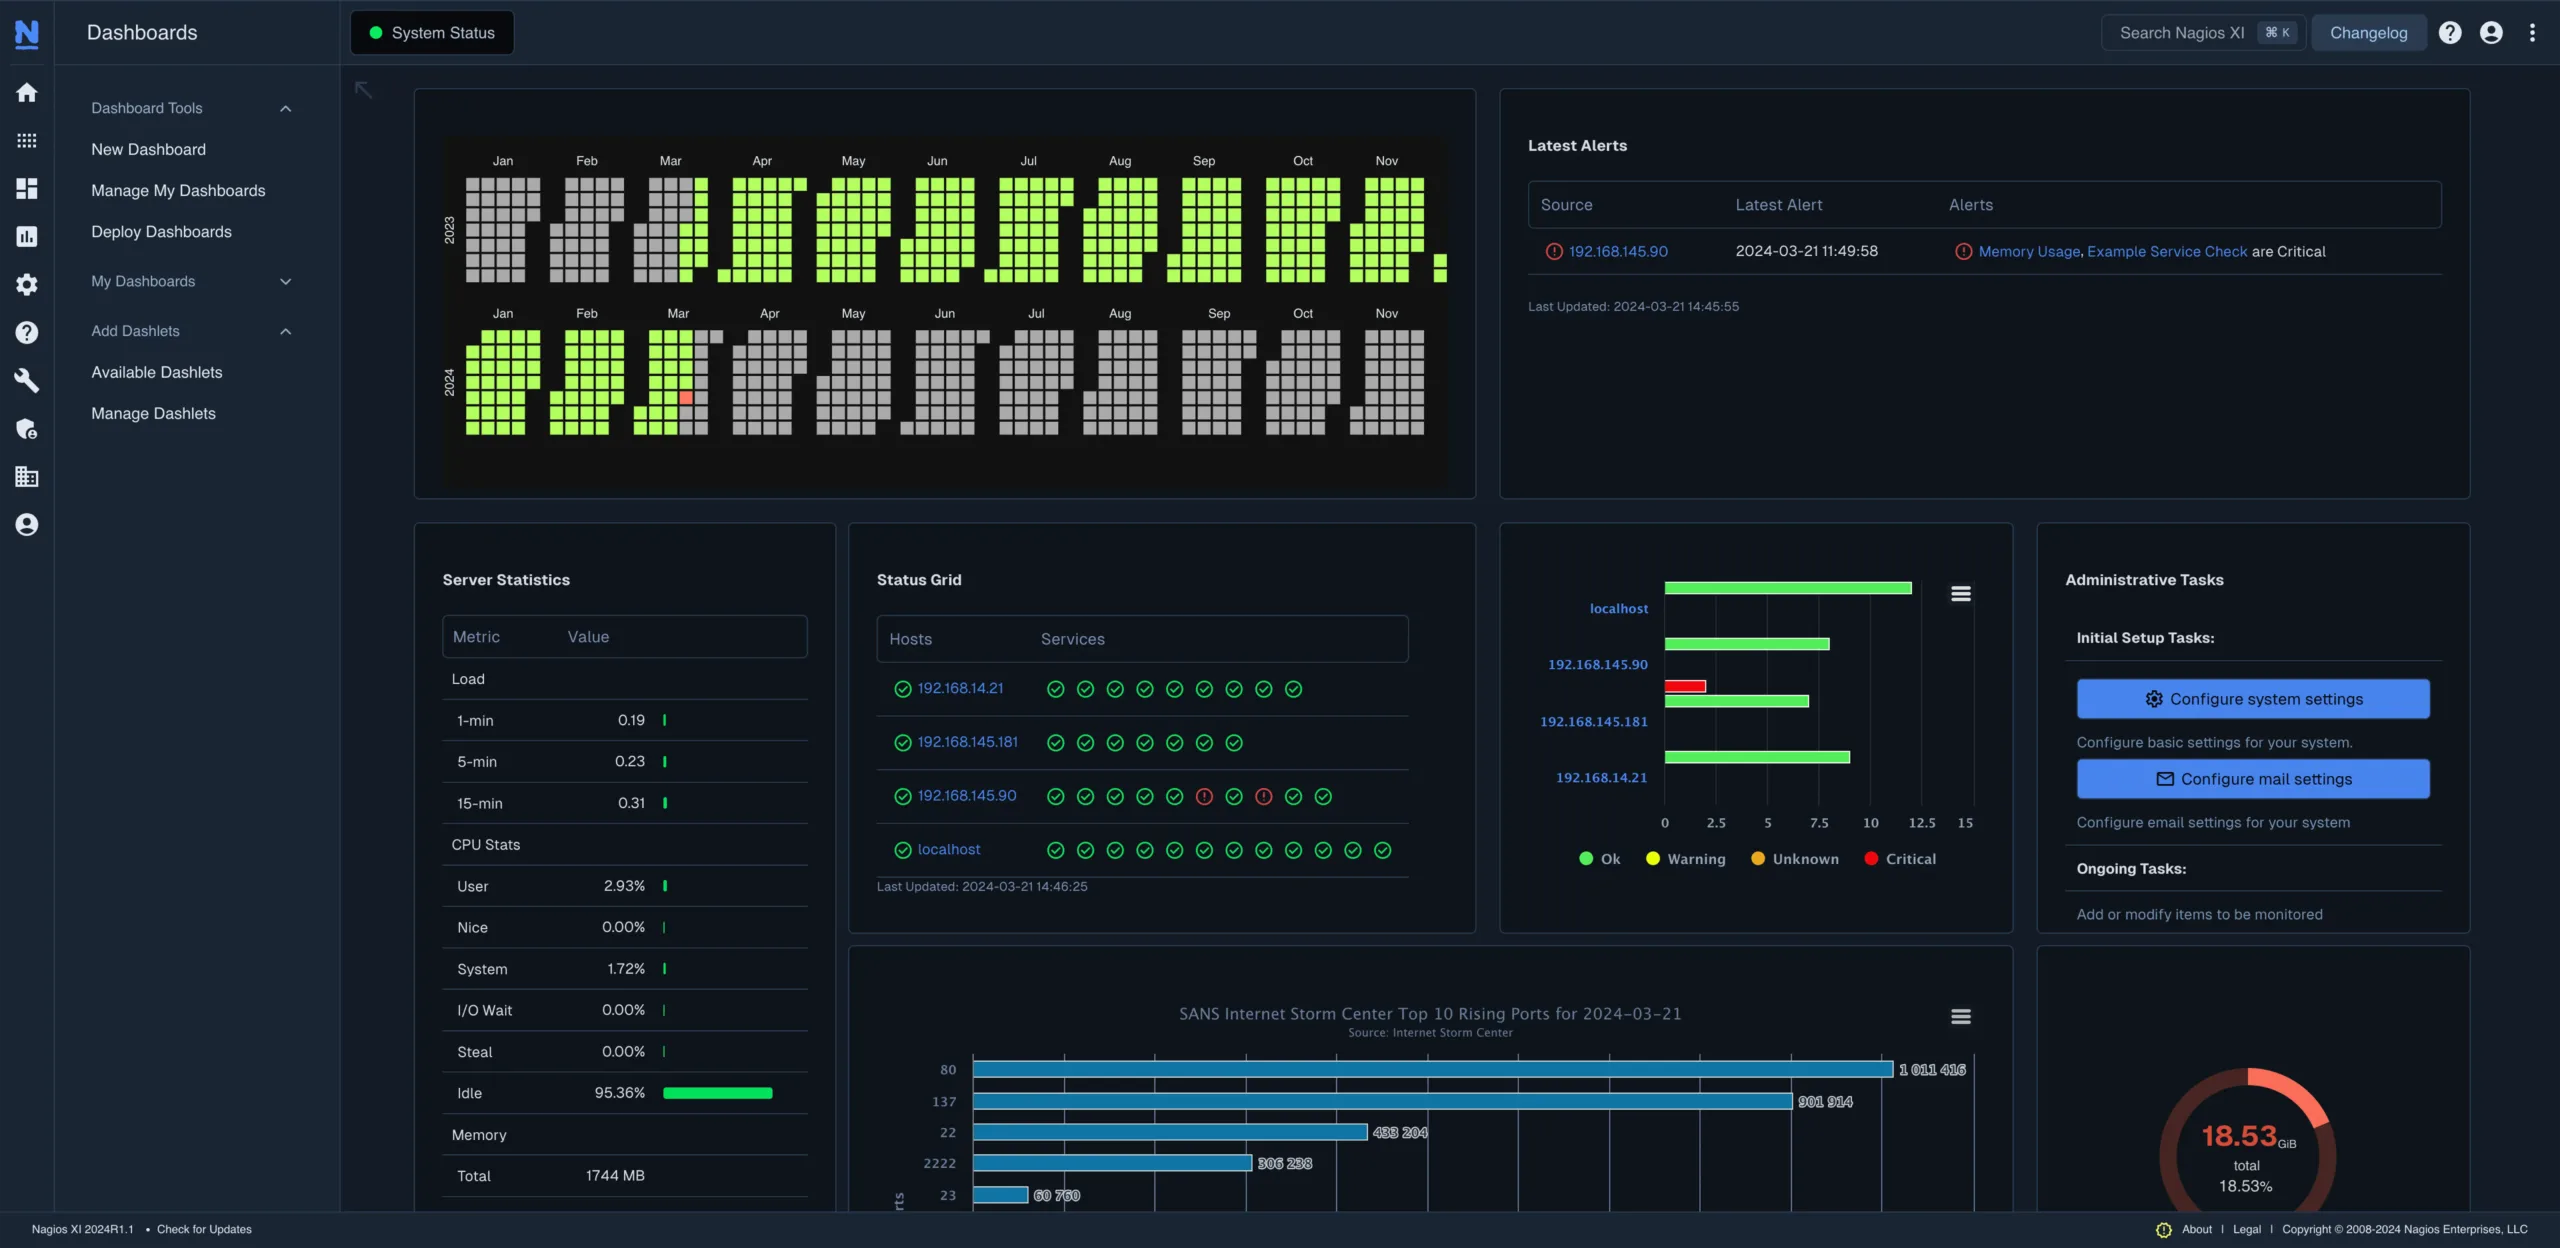 Neptune-theme dashboard screenshot. Part of the Dashboards features in Nagios XI.